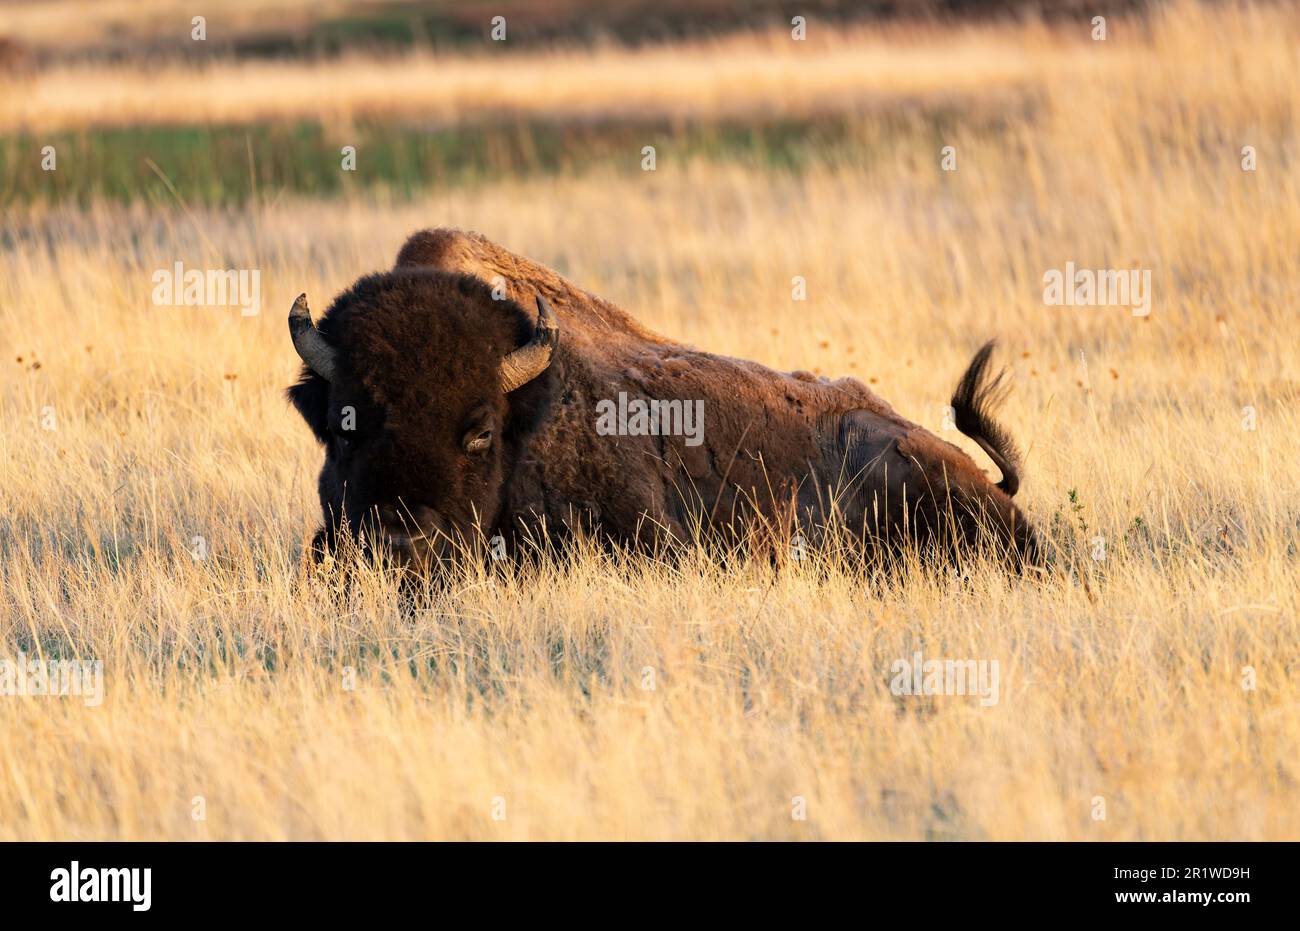 An American bison (Bison bison) relaxing in grass in the North Unit of Theodore Roosevelt National Park in North Dakota. Stock Photo